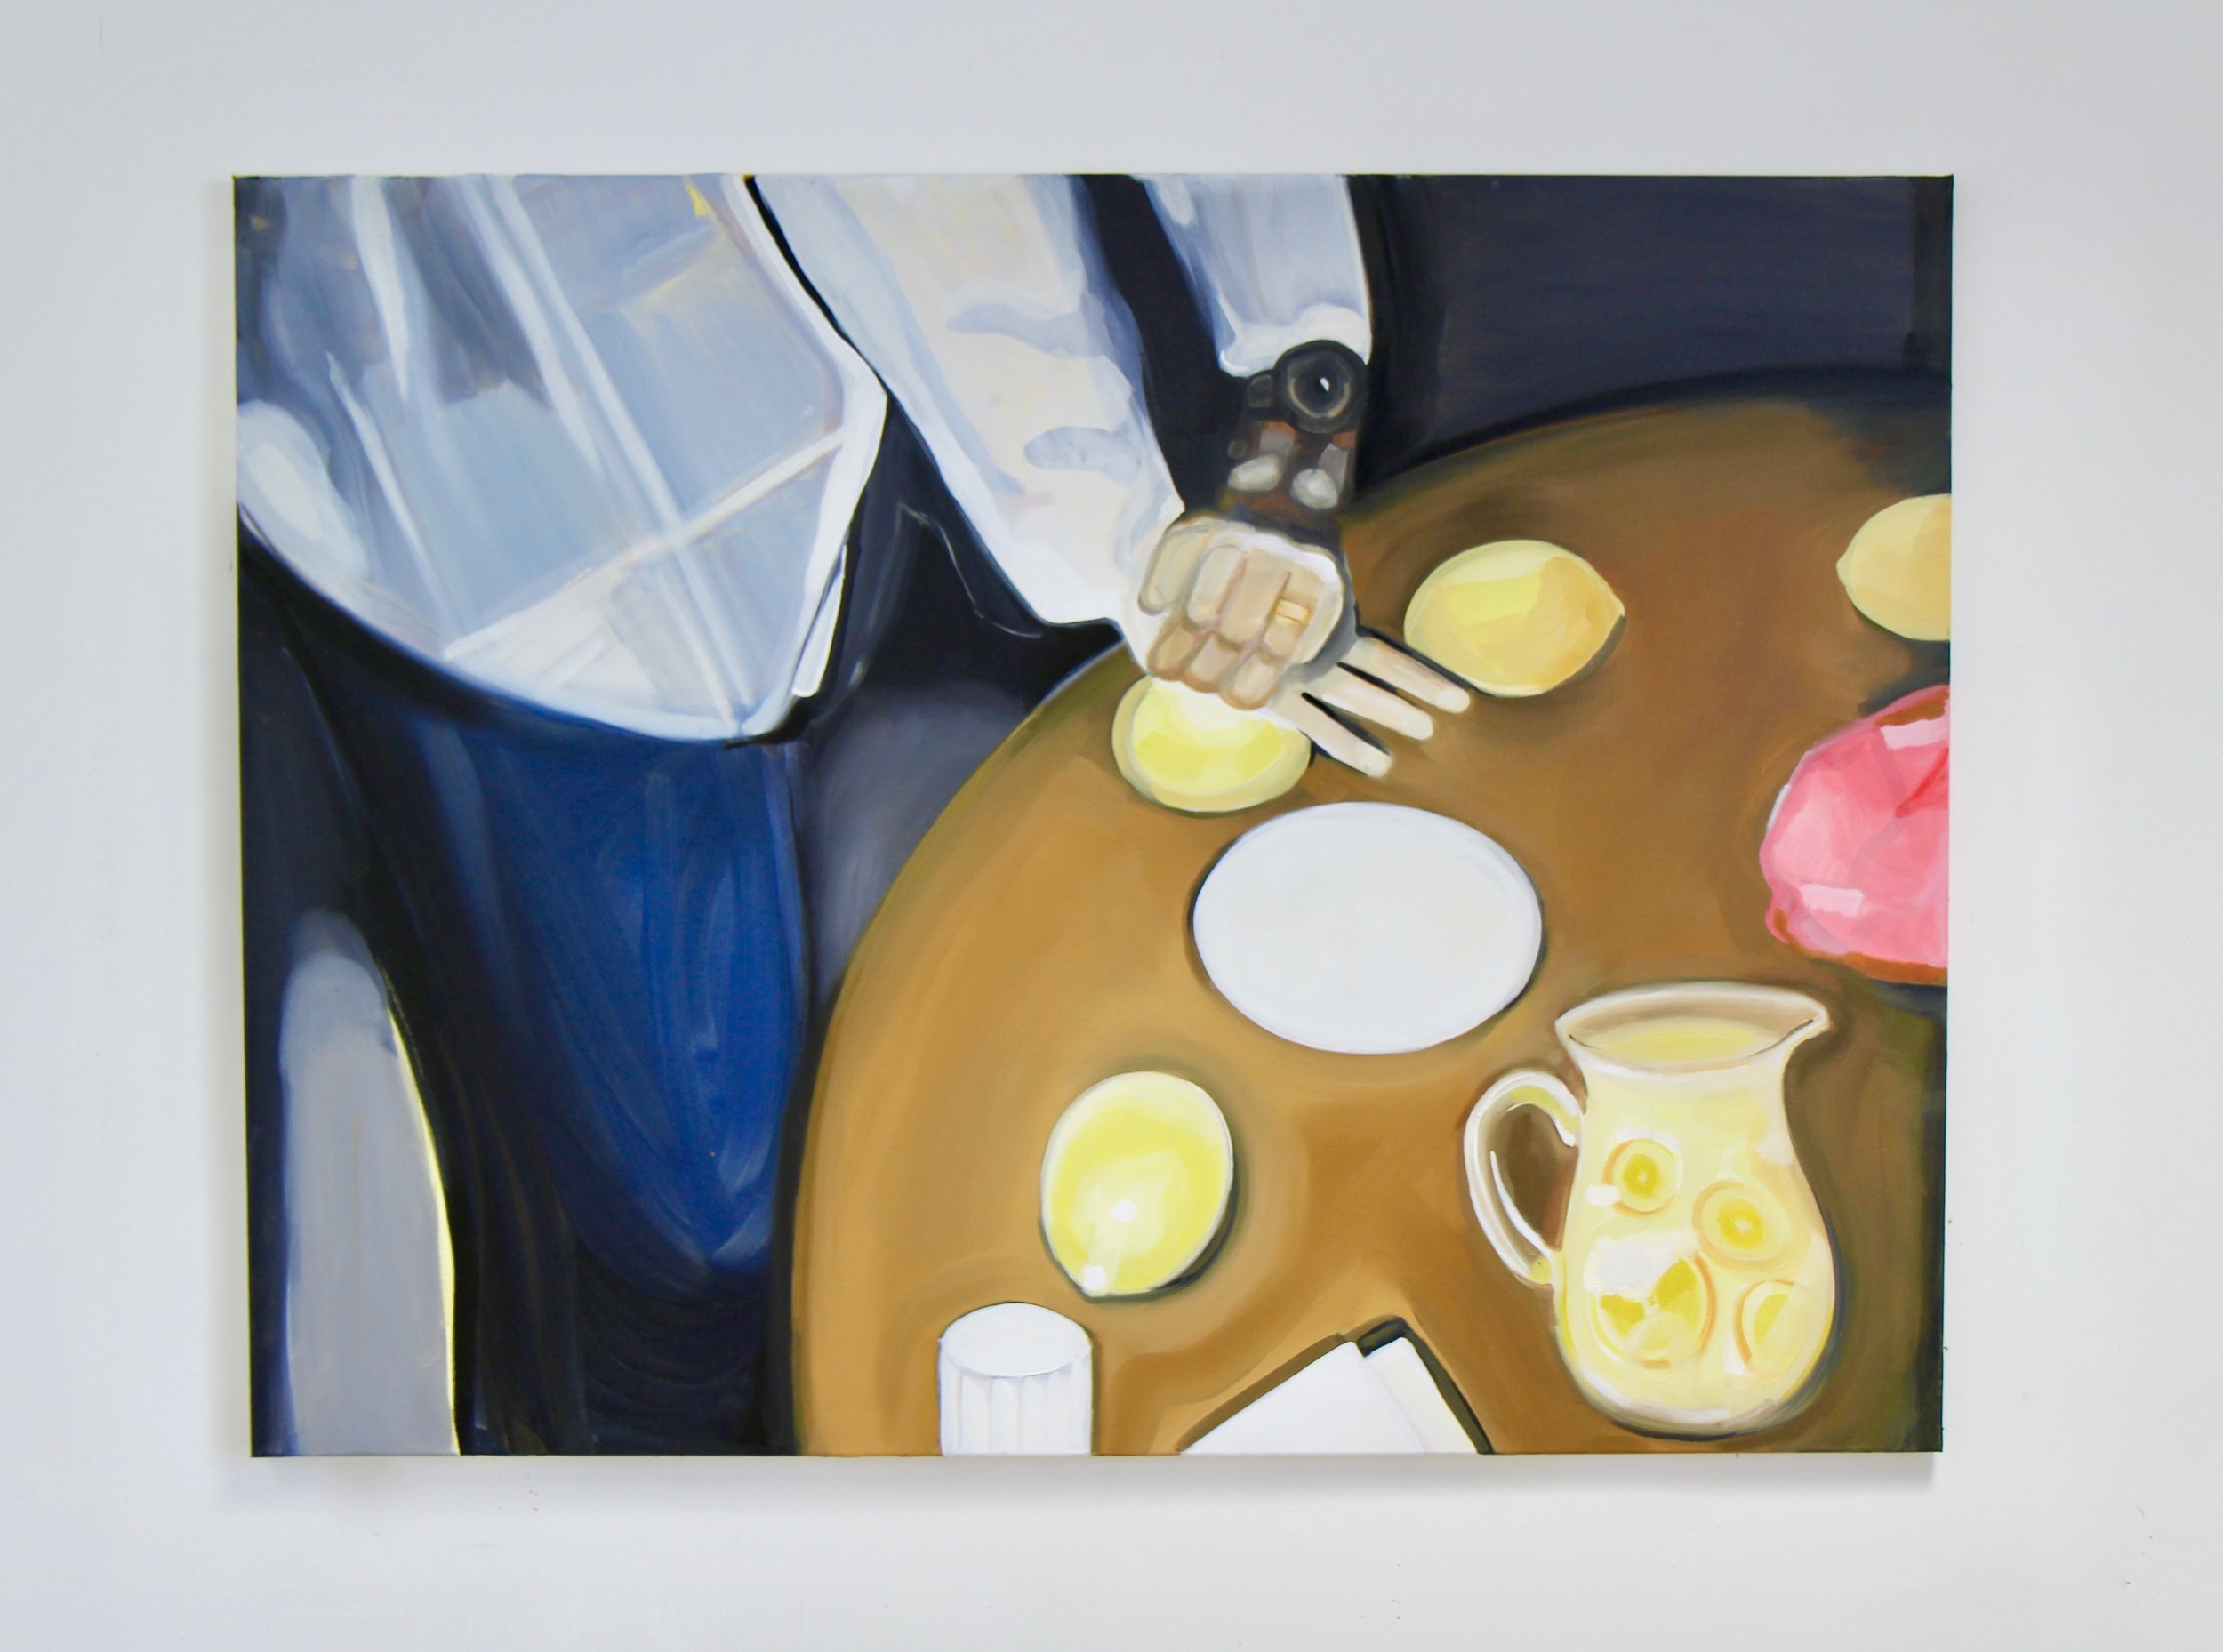   Lemonade , 2018 Oil on canvas 36 x 48 inches 